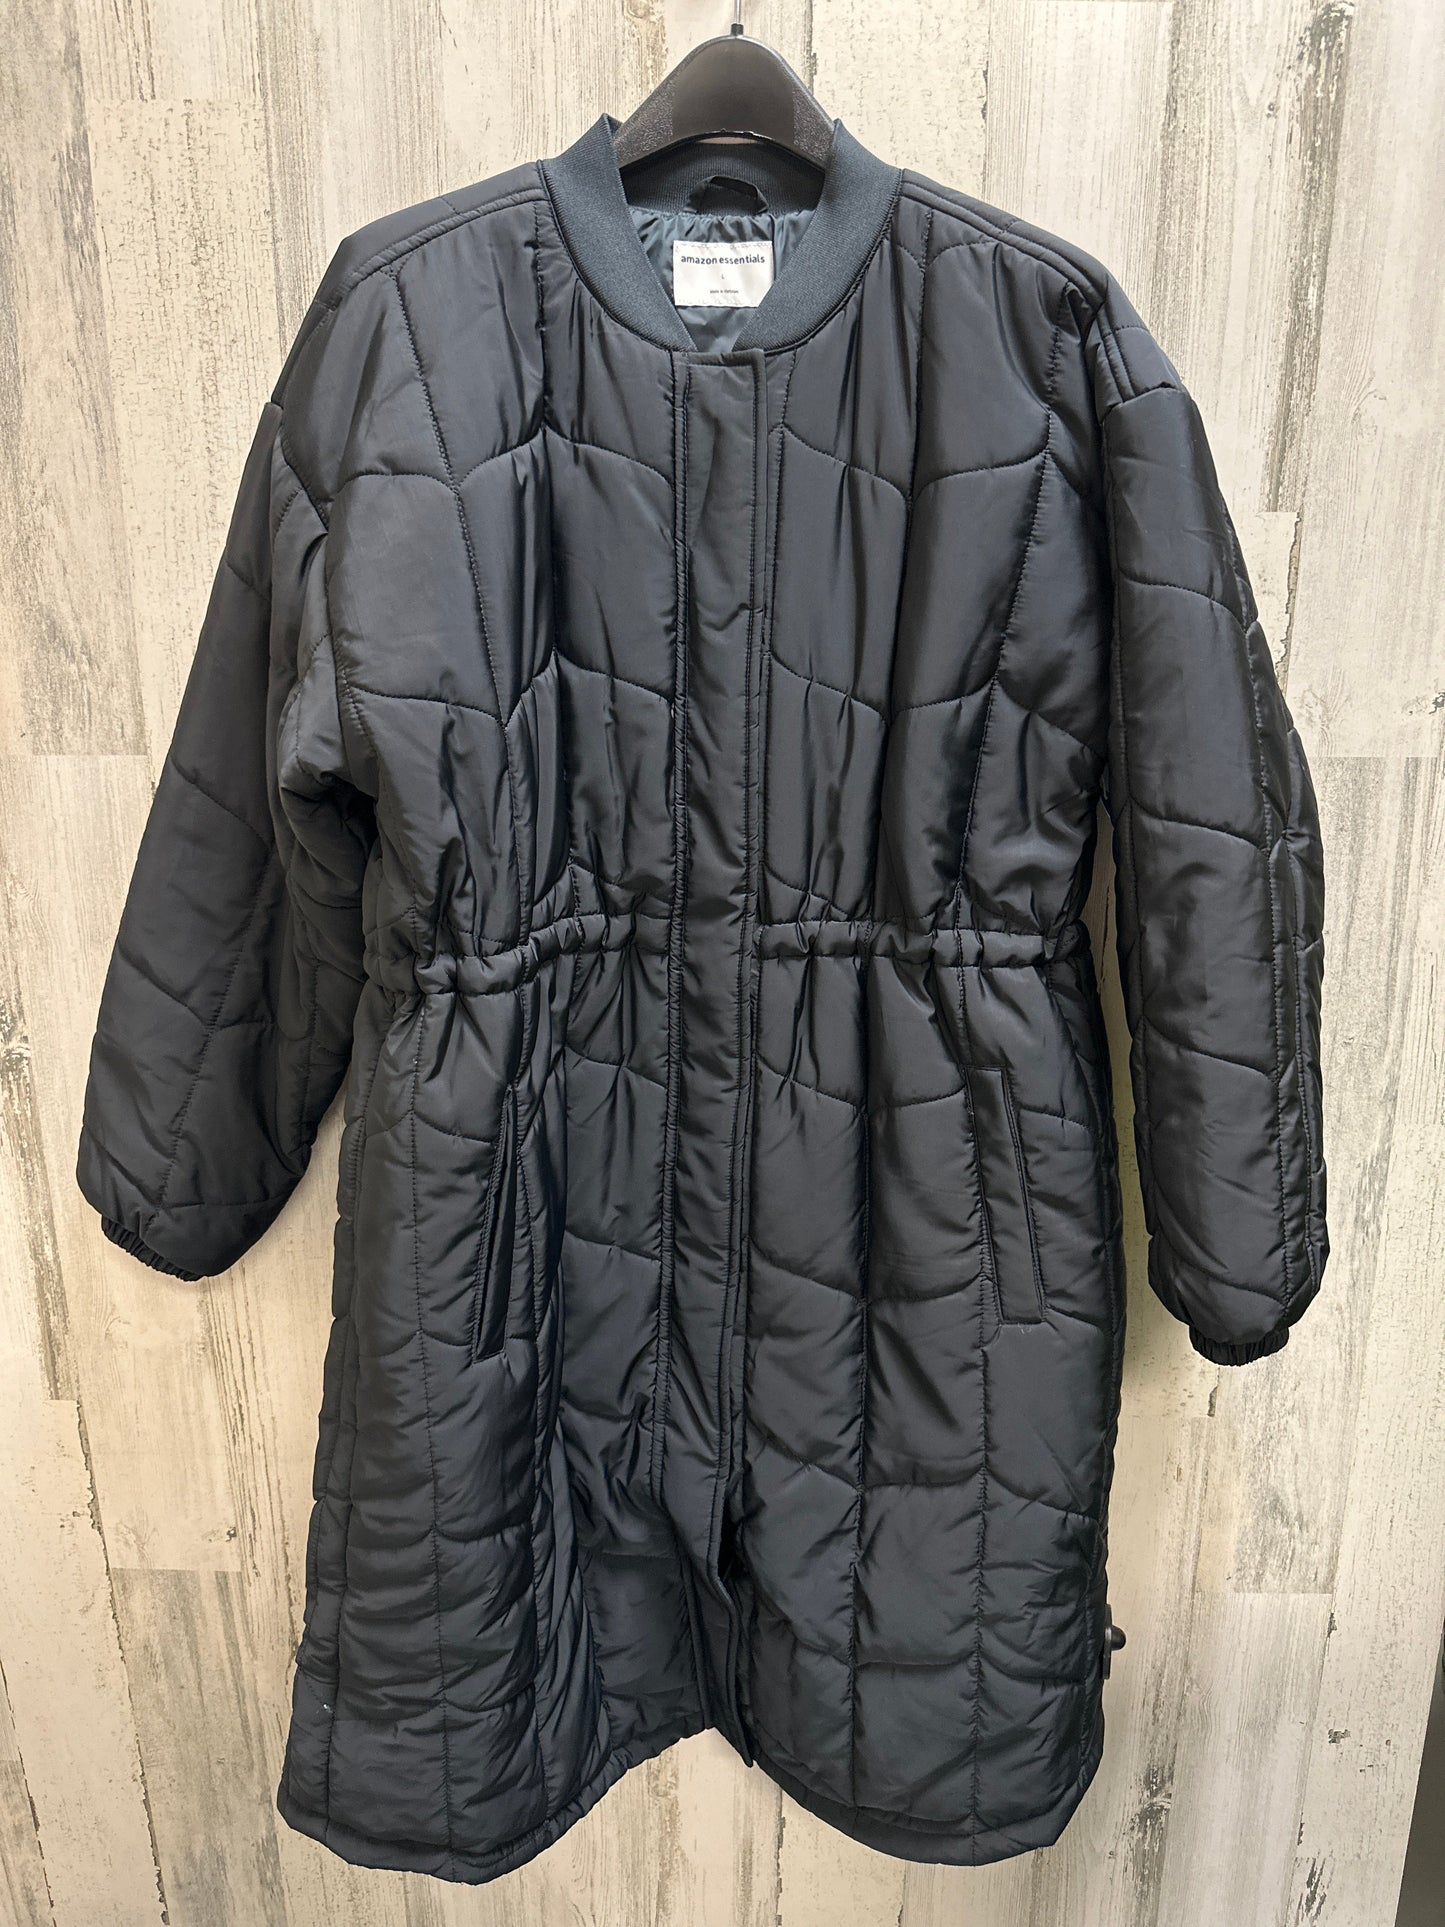 Coat Other By Amazon Essentials  Size: L